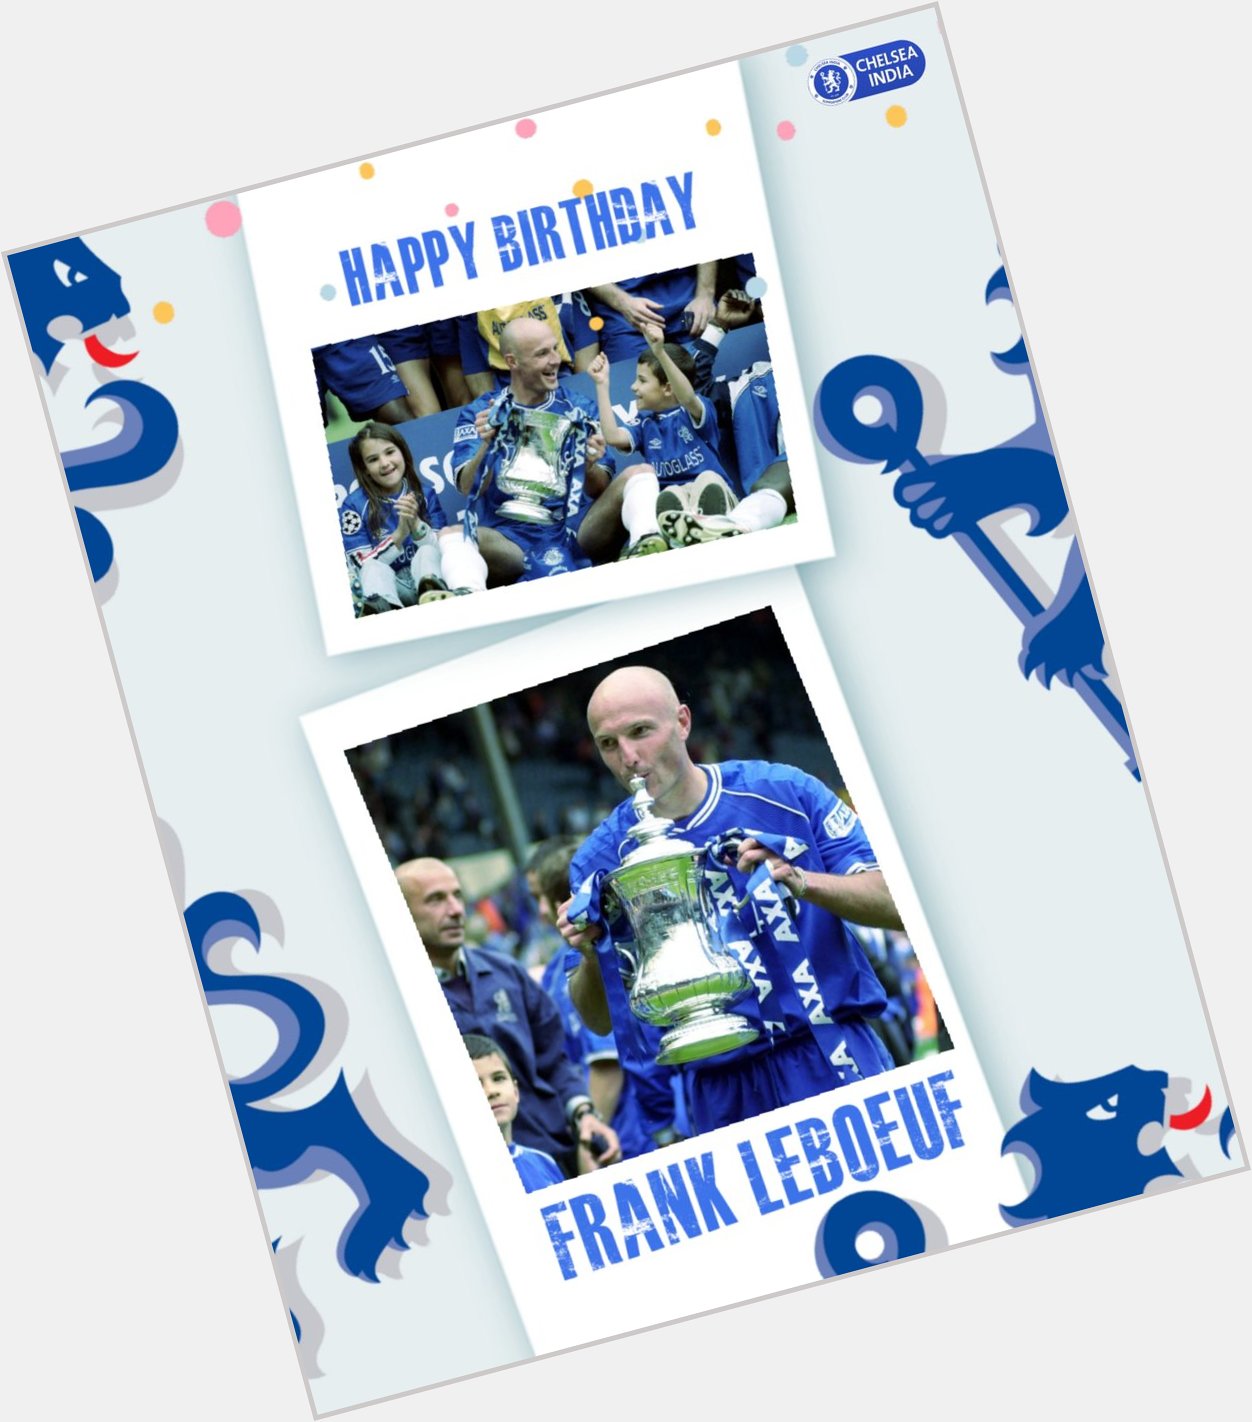 Wishing a very Happy Birthday to one of the Chelsea greats, Frank Leboeuf    